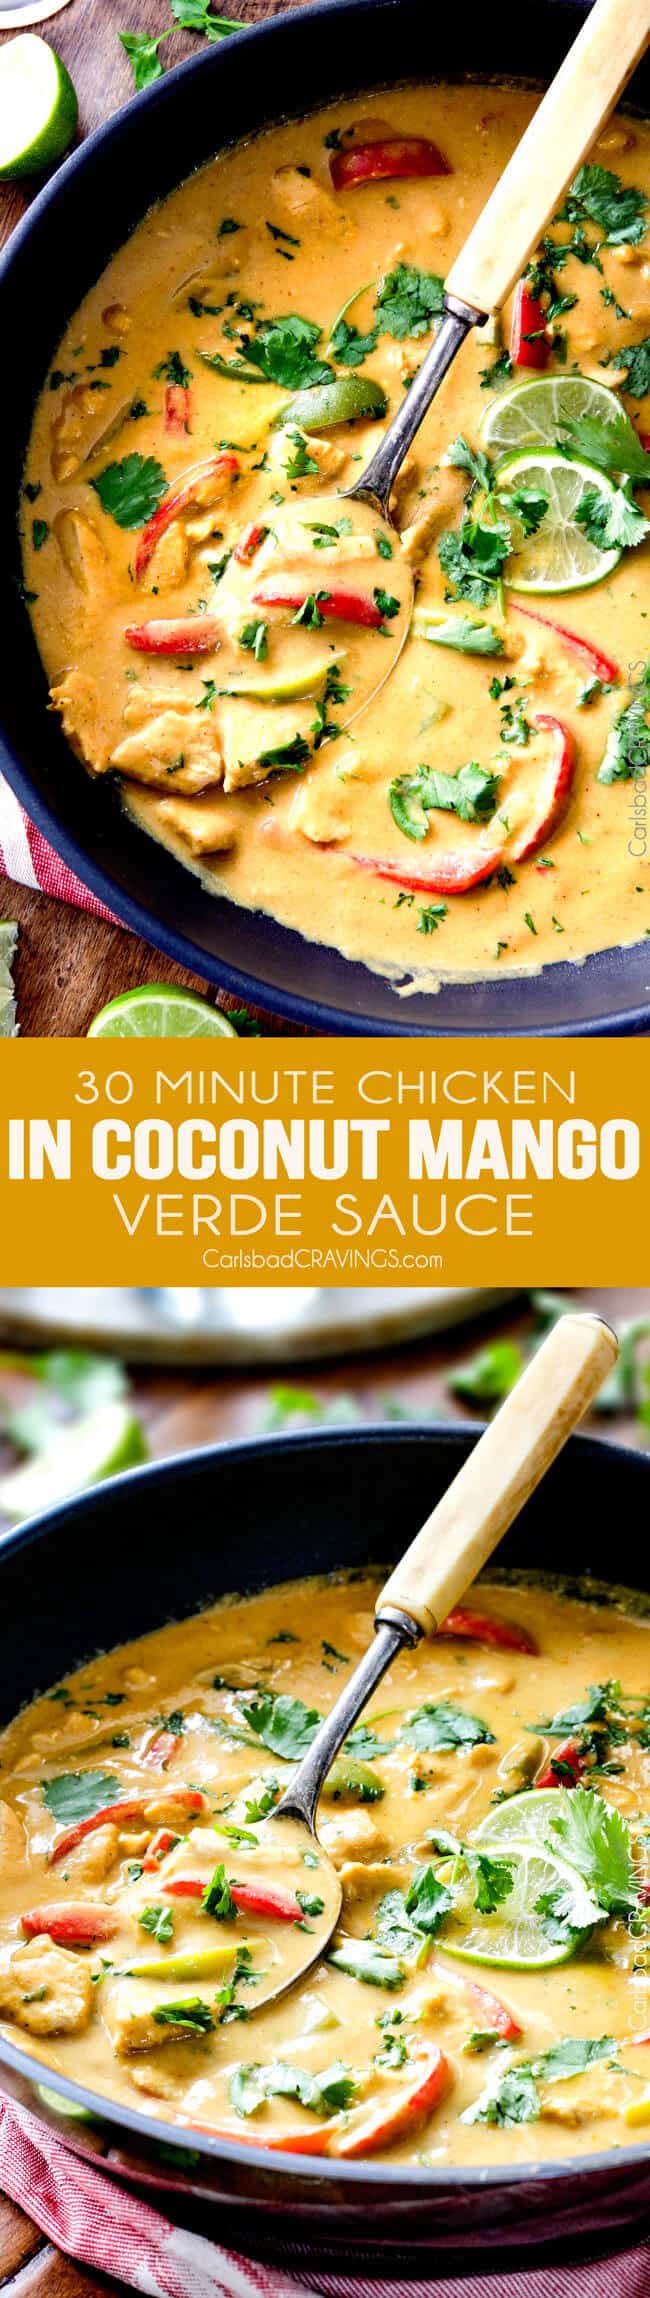 Chicken in Coconut Mango Verde Sauce - my family LOVES this 30 minute meal and I seriously dream about the incredible creamy sauce!